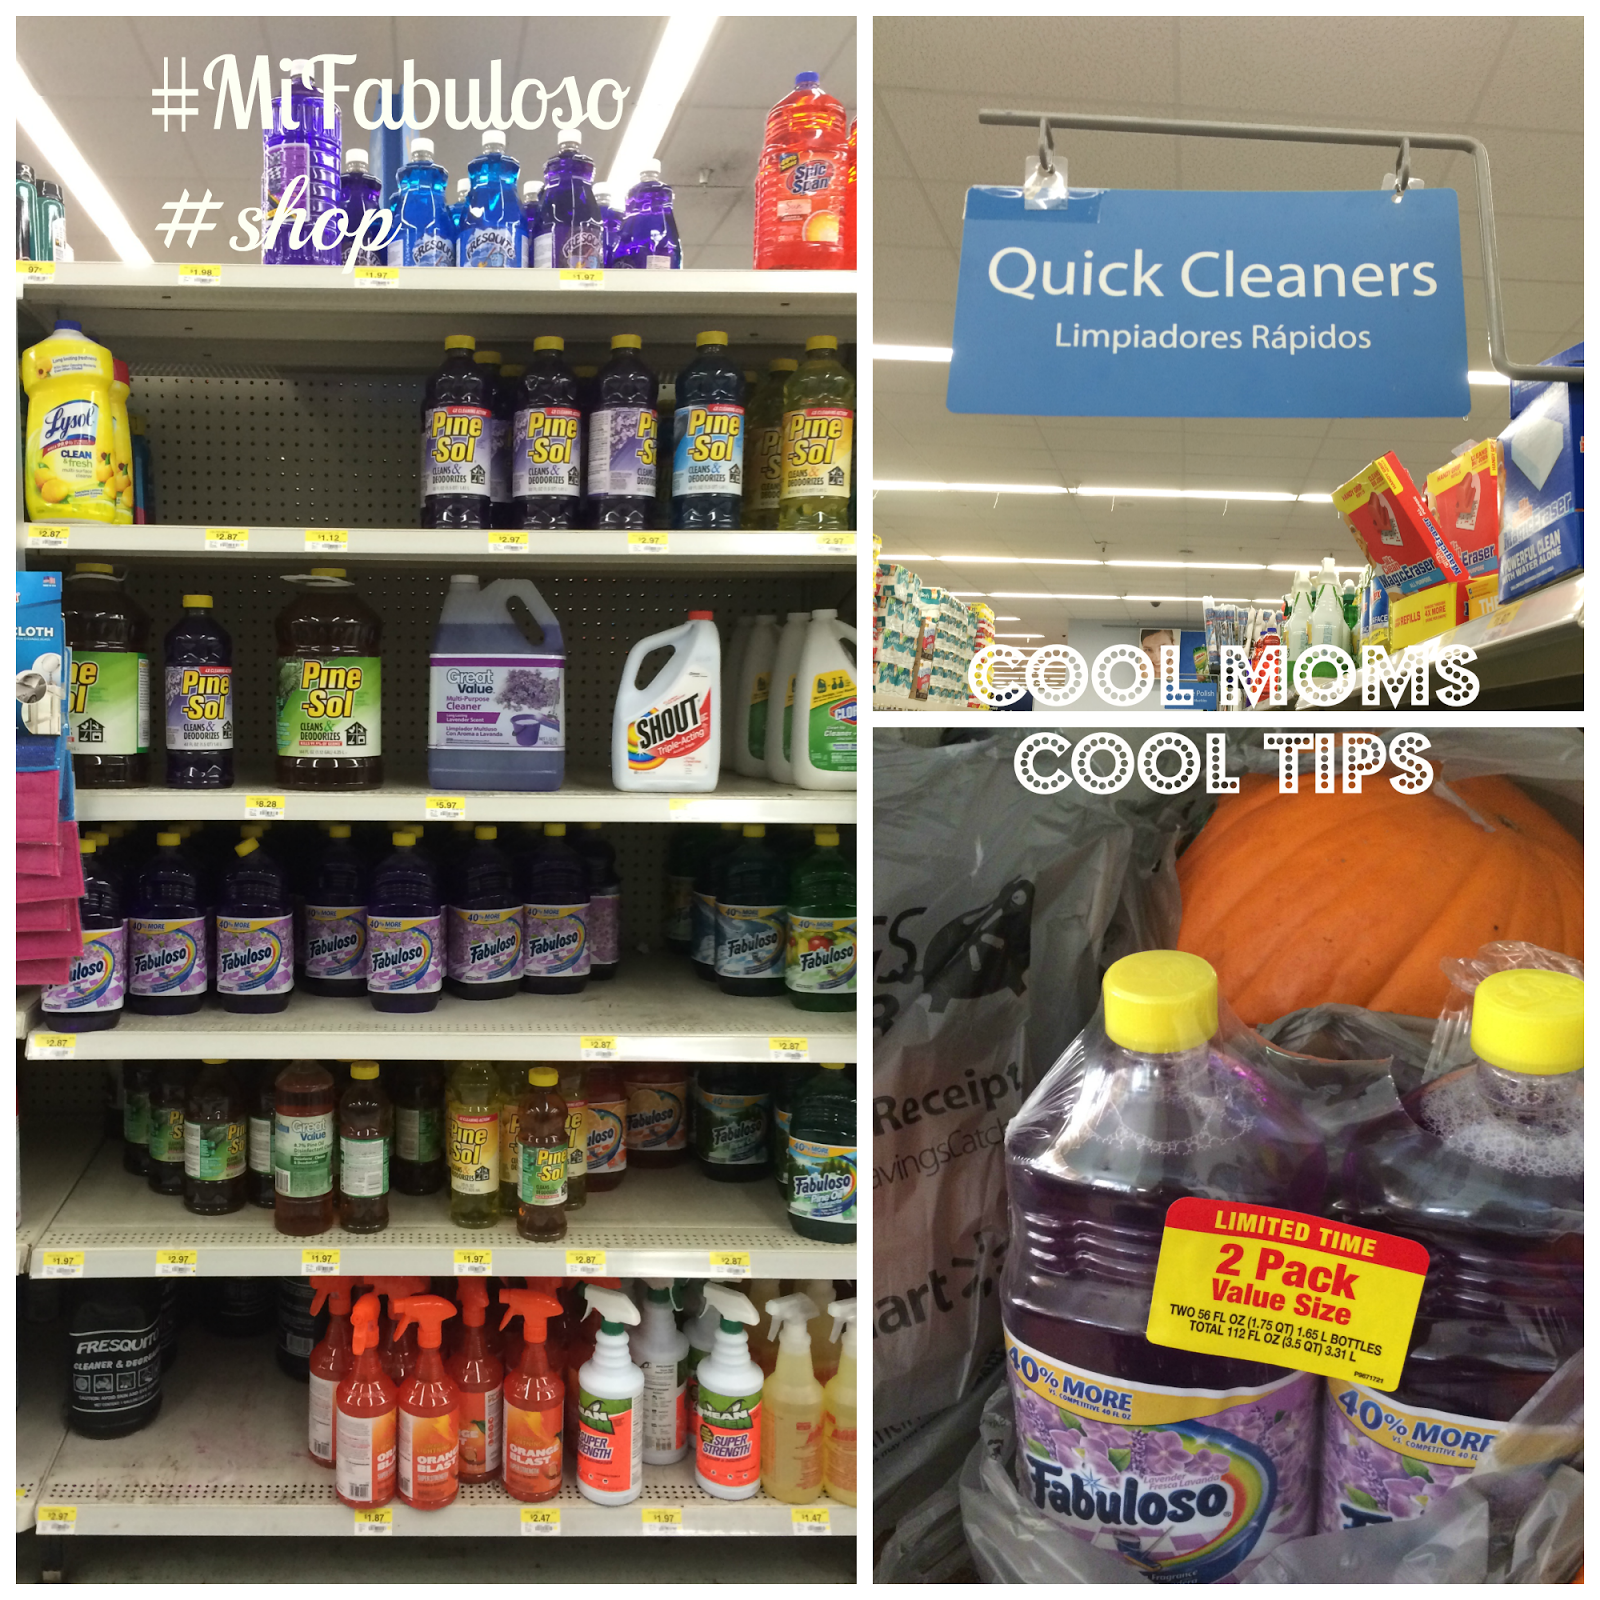 Cool Moms Cool Tips #MiFabuloso #shop #collectivebias